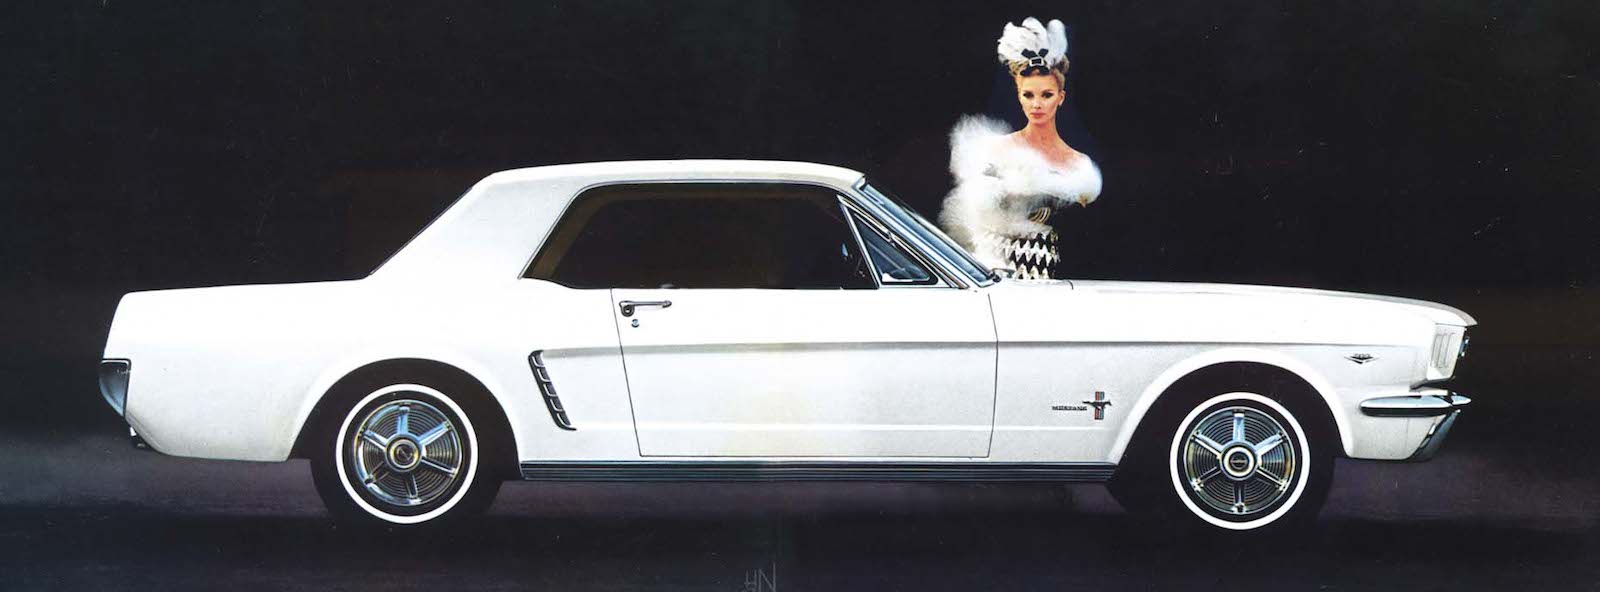 Happy 50th Anniversary To The Ford Mustang!